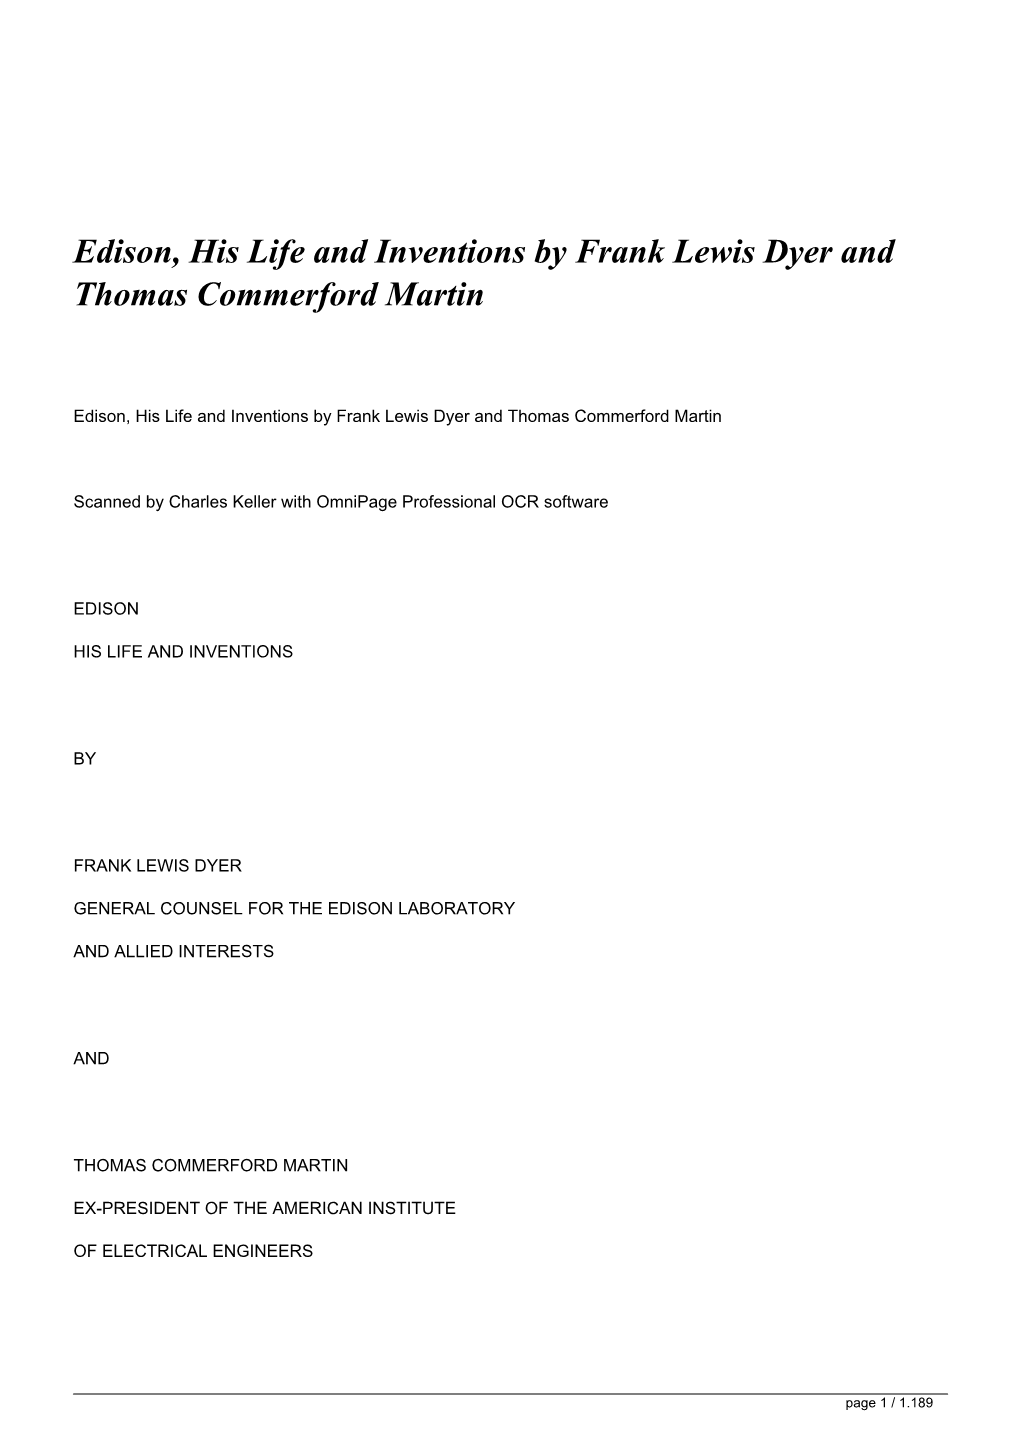 Edison, His Life and Inventions by Frank Lewis Dyer and Thomas Commerford Martin&lt;/H1&gt;